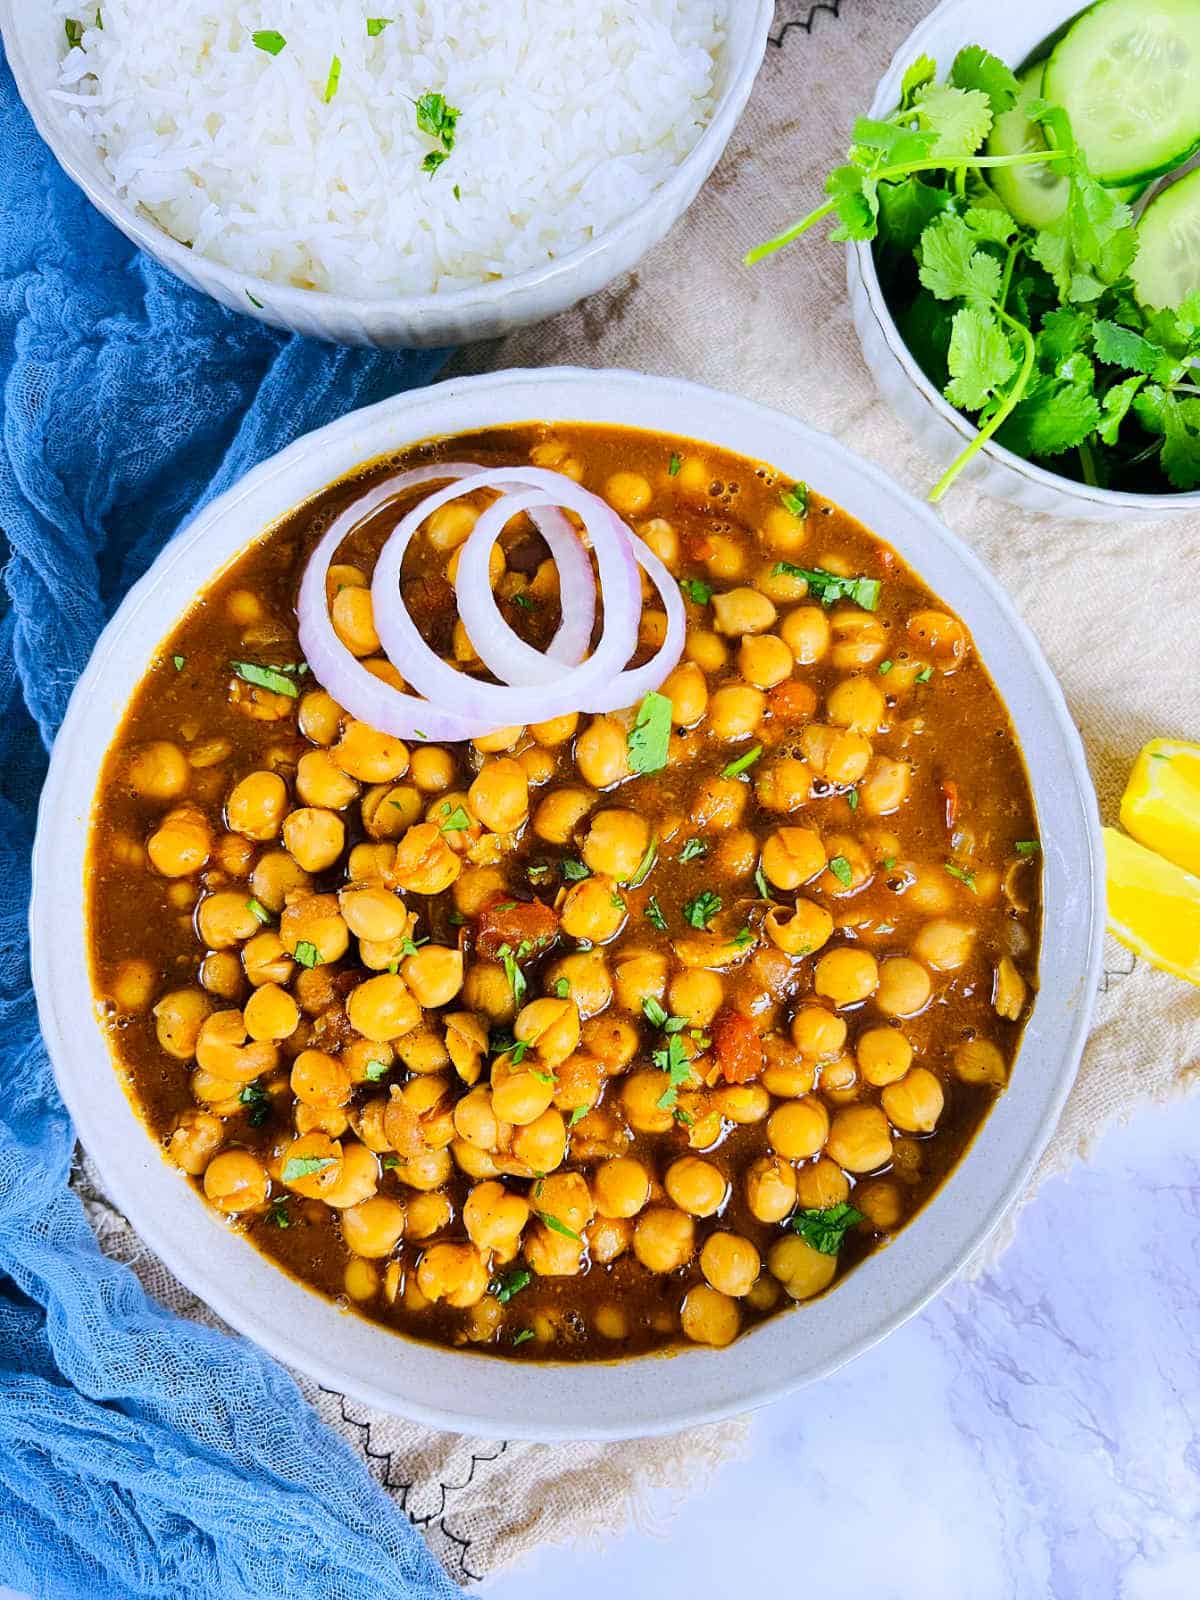 Chana masala in a white bowl along with rice and salad.